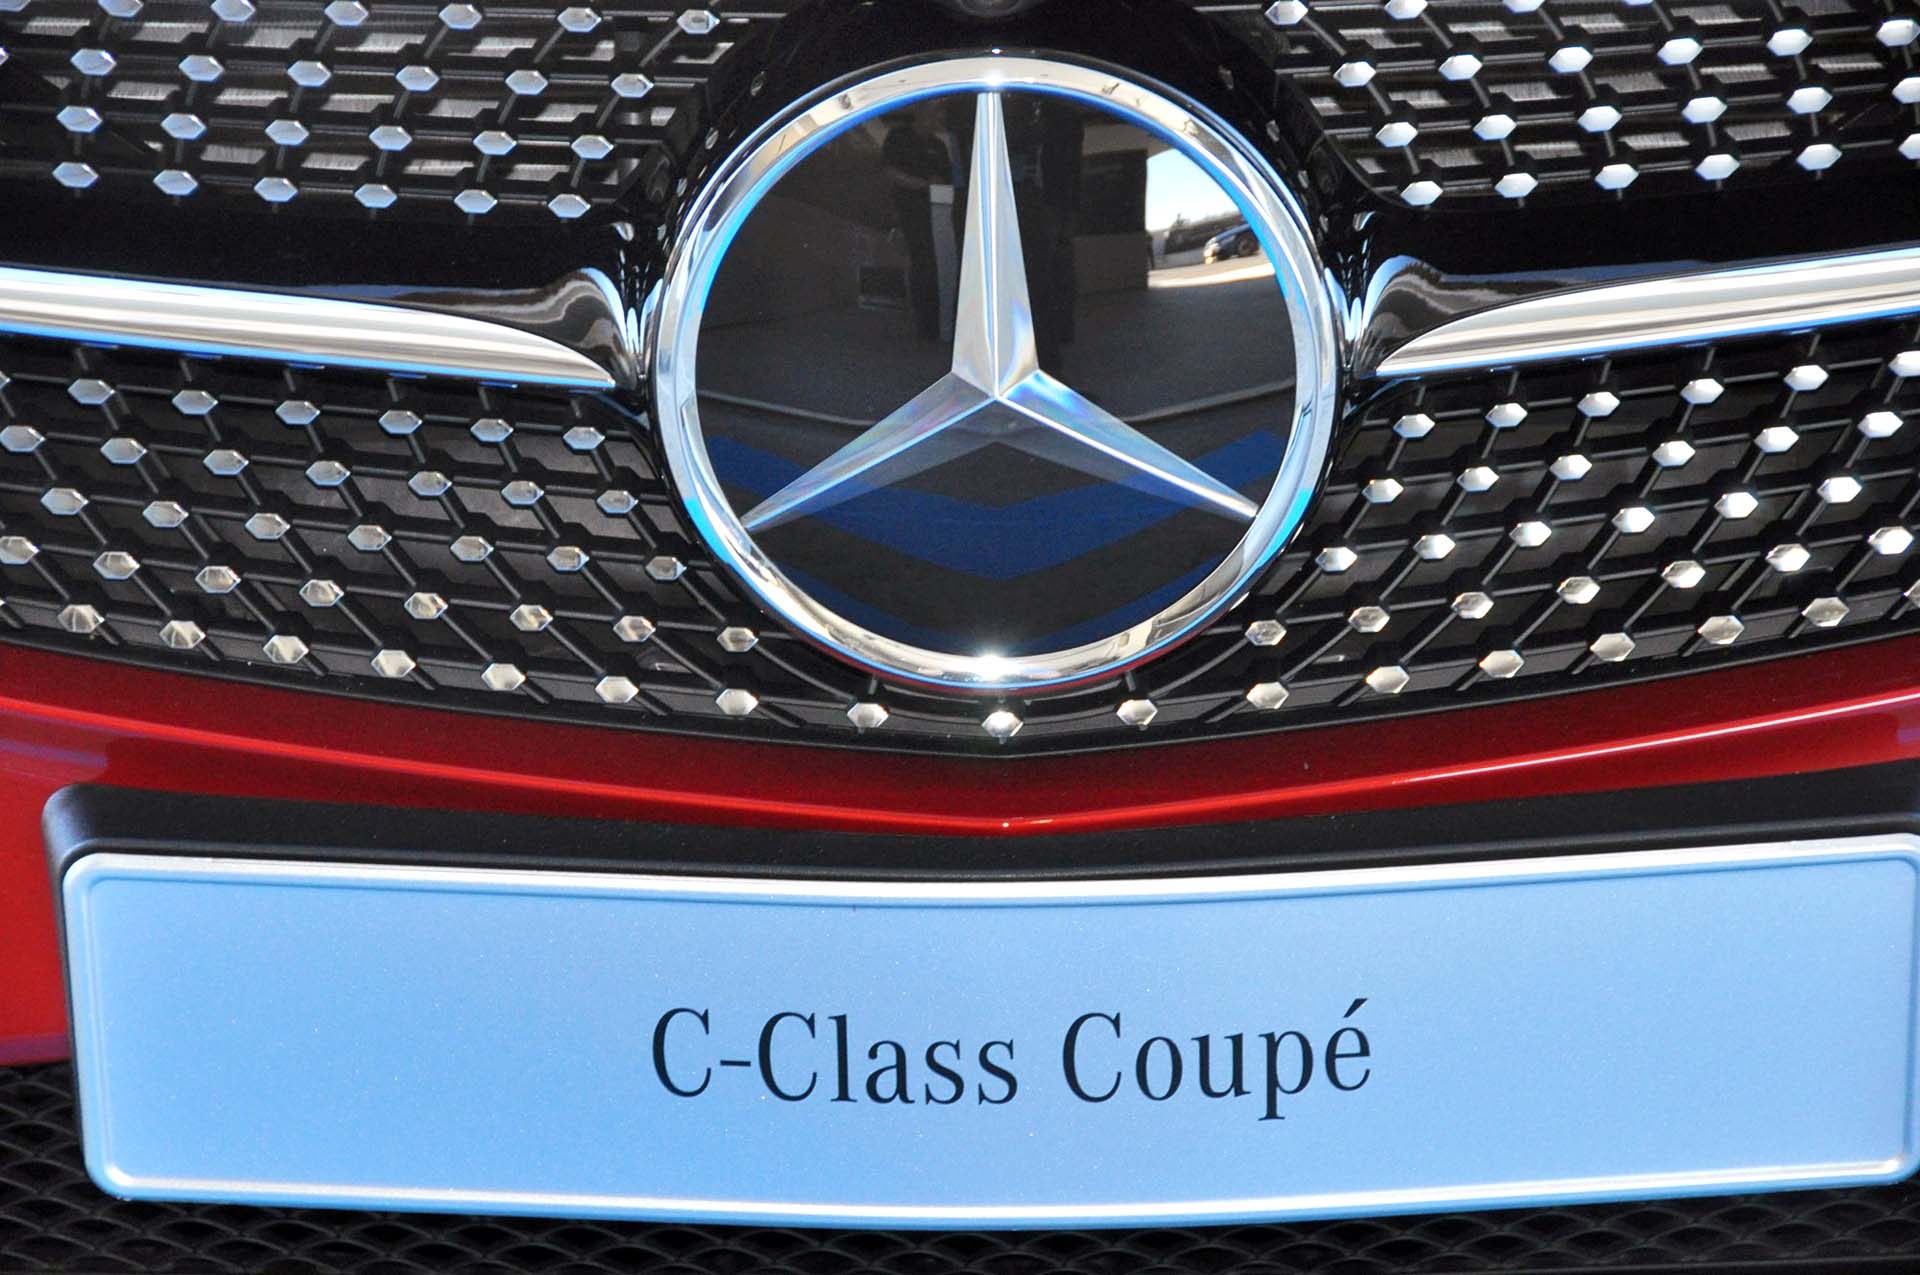 The new C-Class arrives next year. Late first quarter (March) for the C 300; Third quarter (July) for the AMG C 63 and C 63 S.